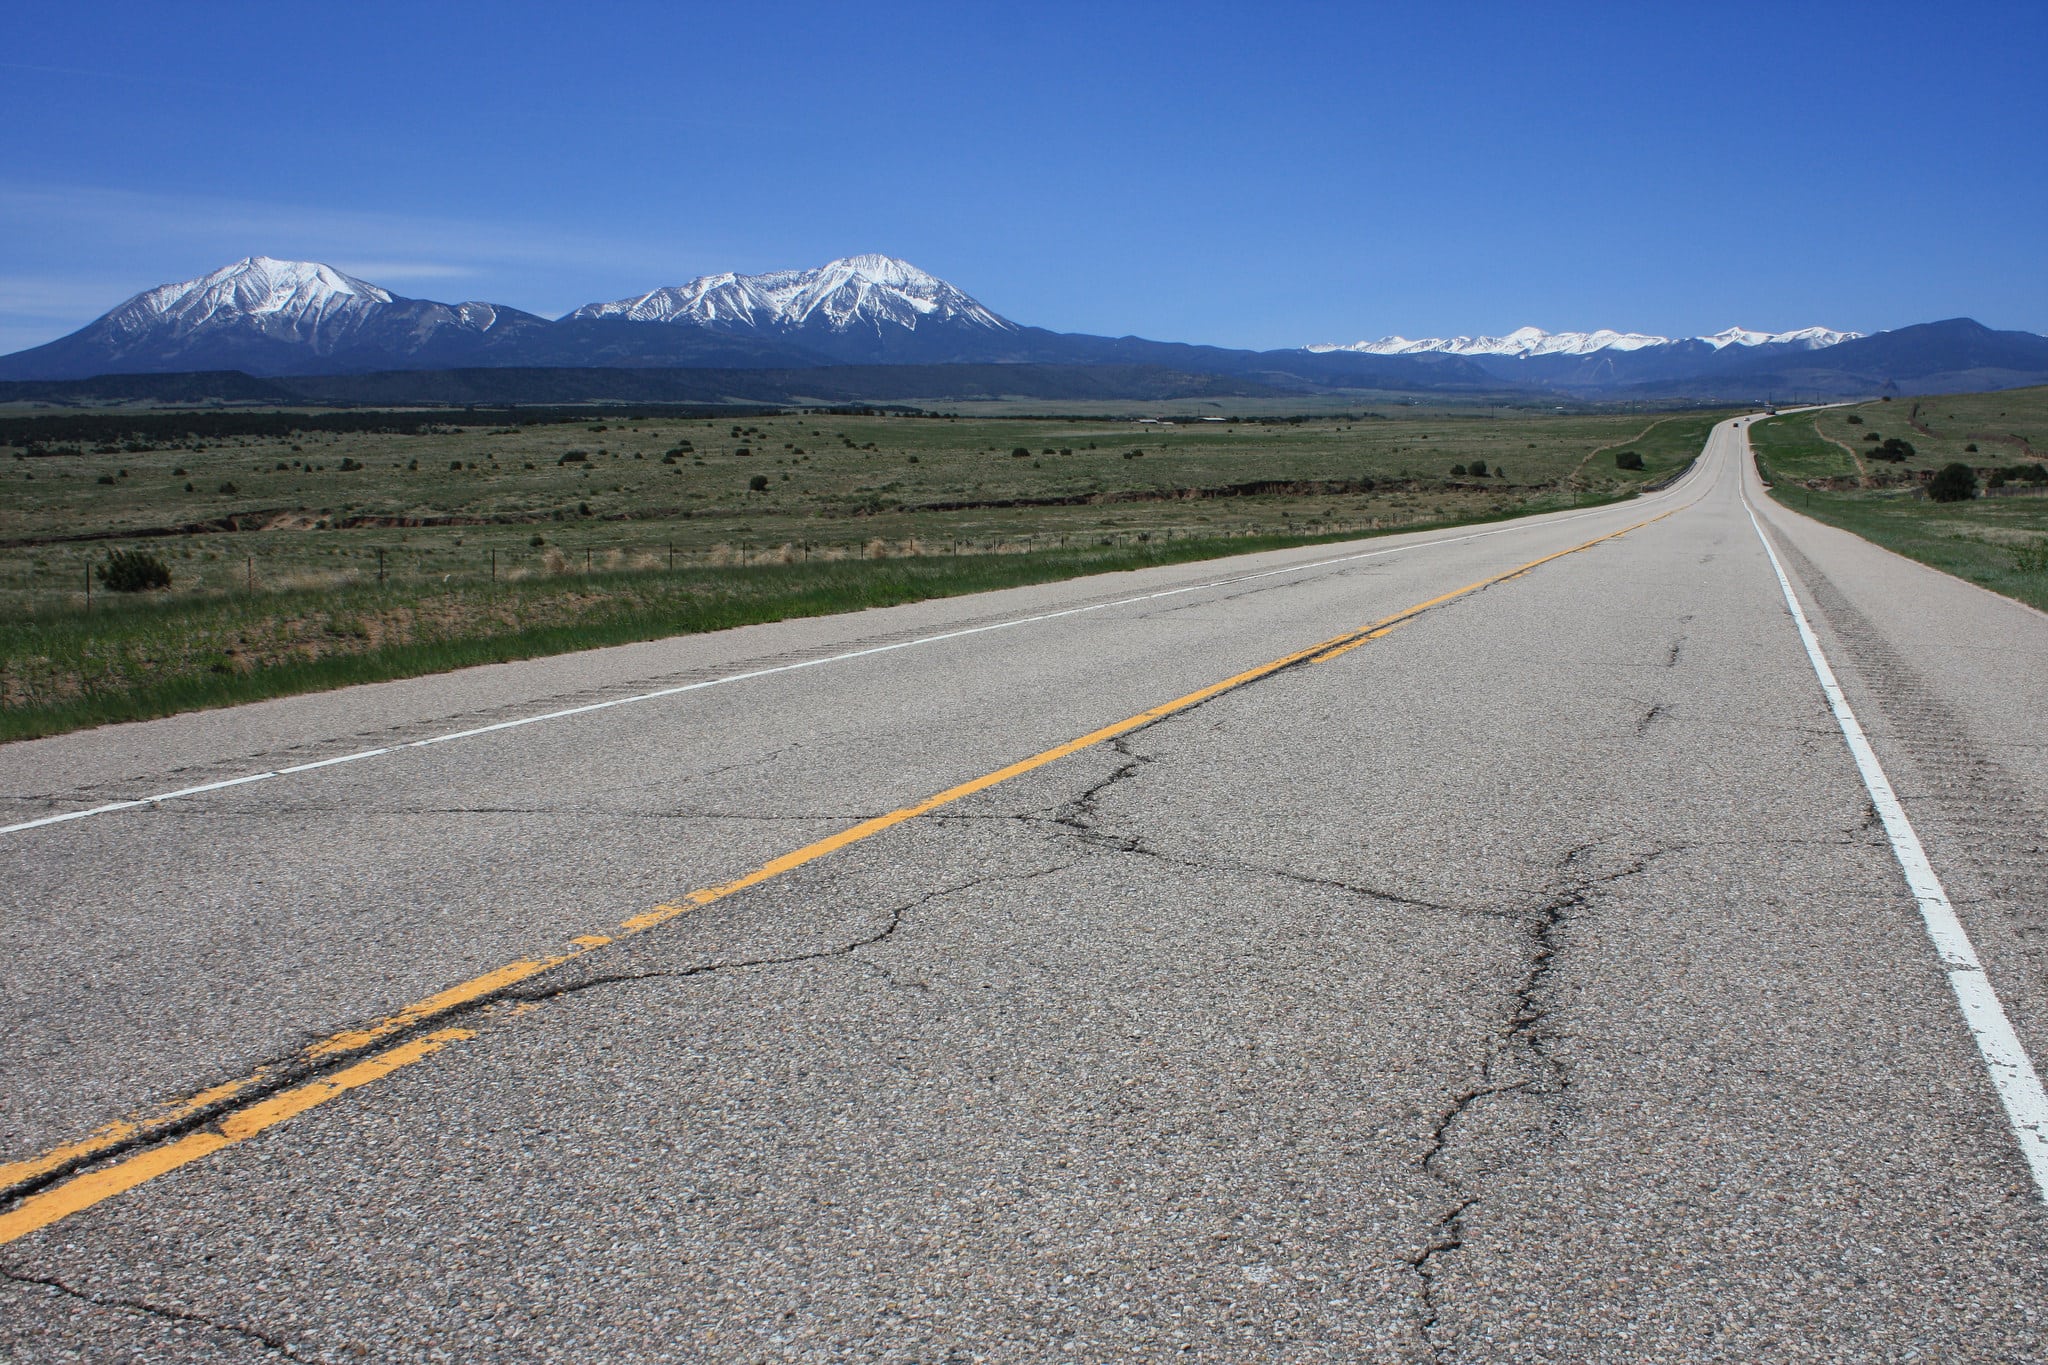 The Spanish Peaks and Trinchera Peak, taken from along U.S. 160, about 8 miles west of Walsenburg, Colorado.